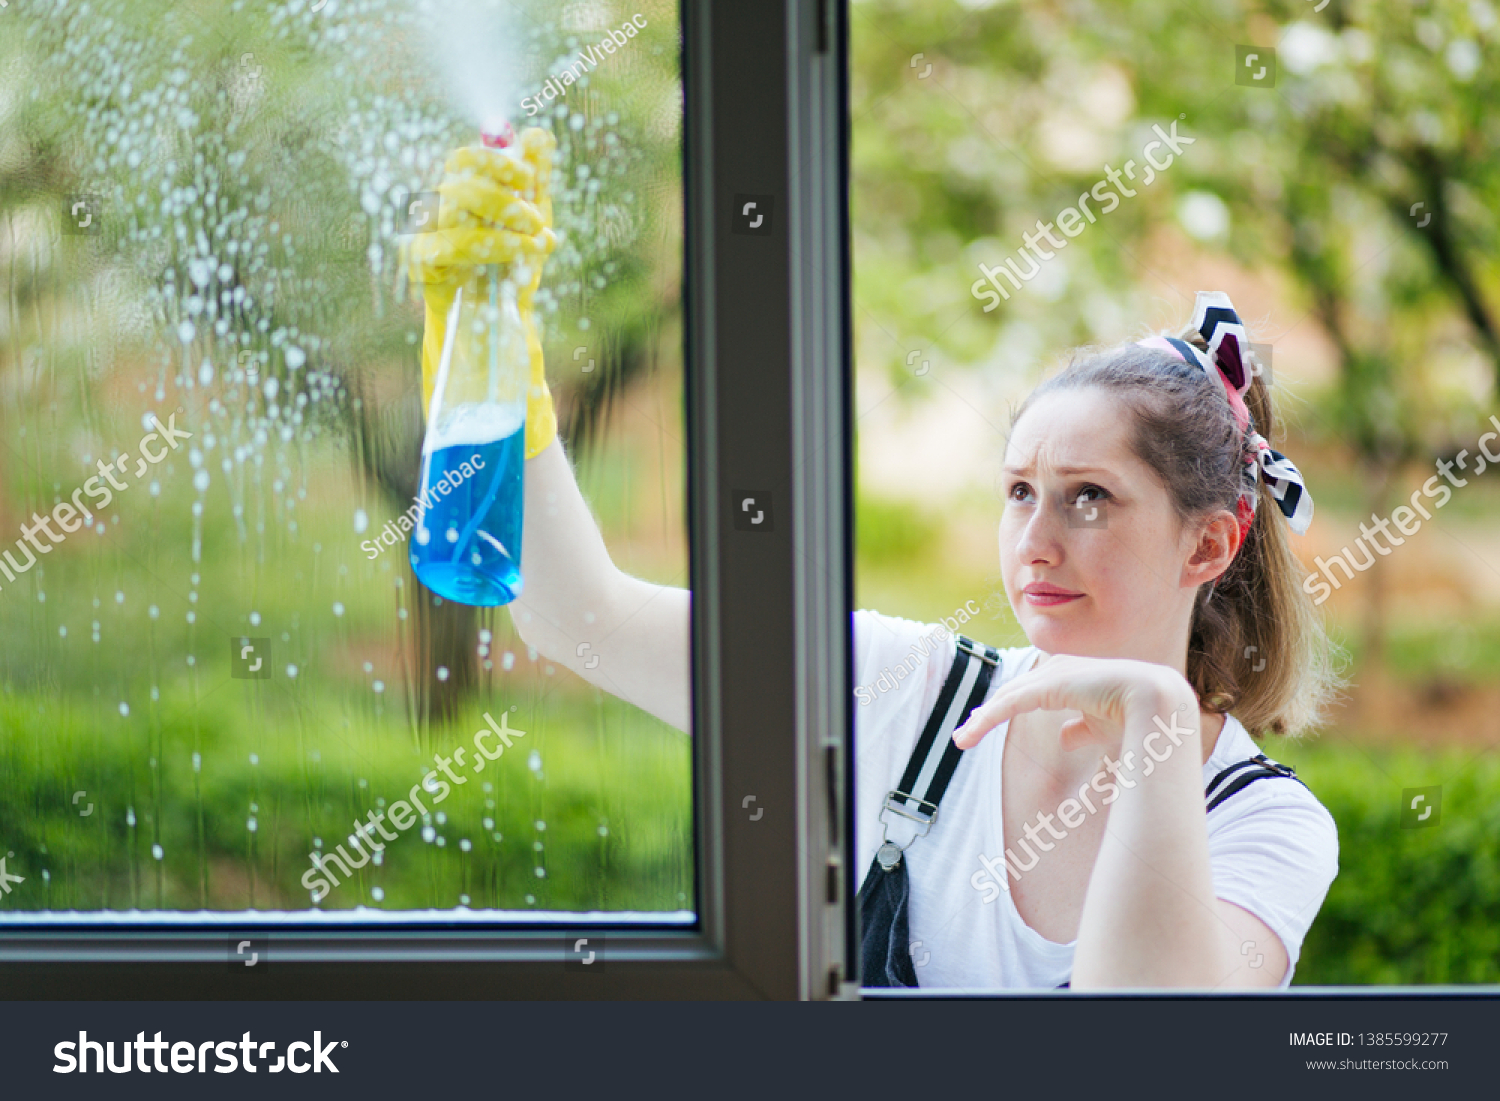 Young funny housewife cleaning windows with spray detergent. housework concept. #1385599277